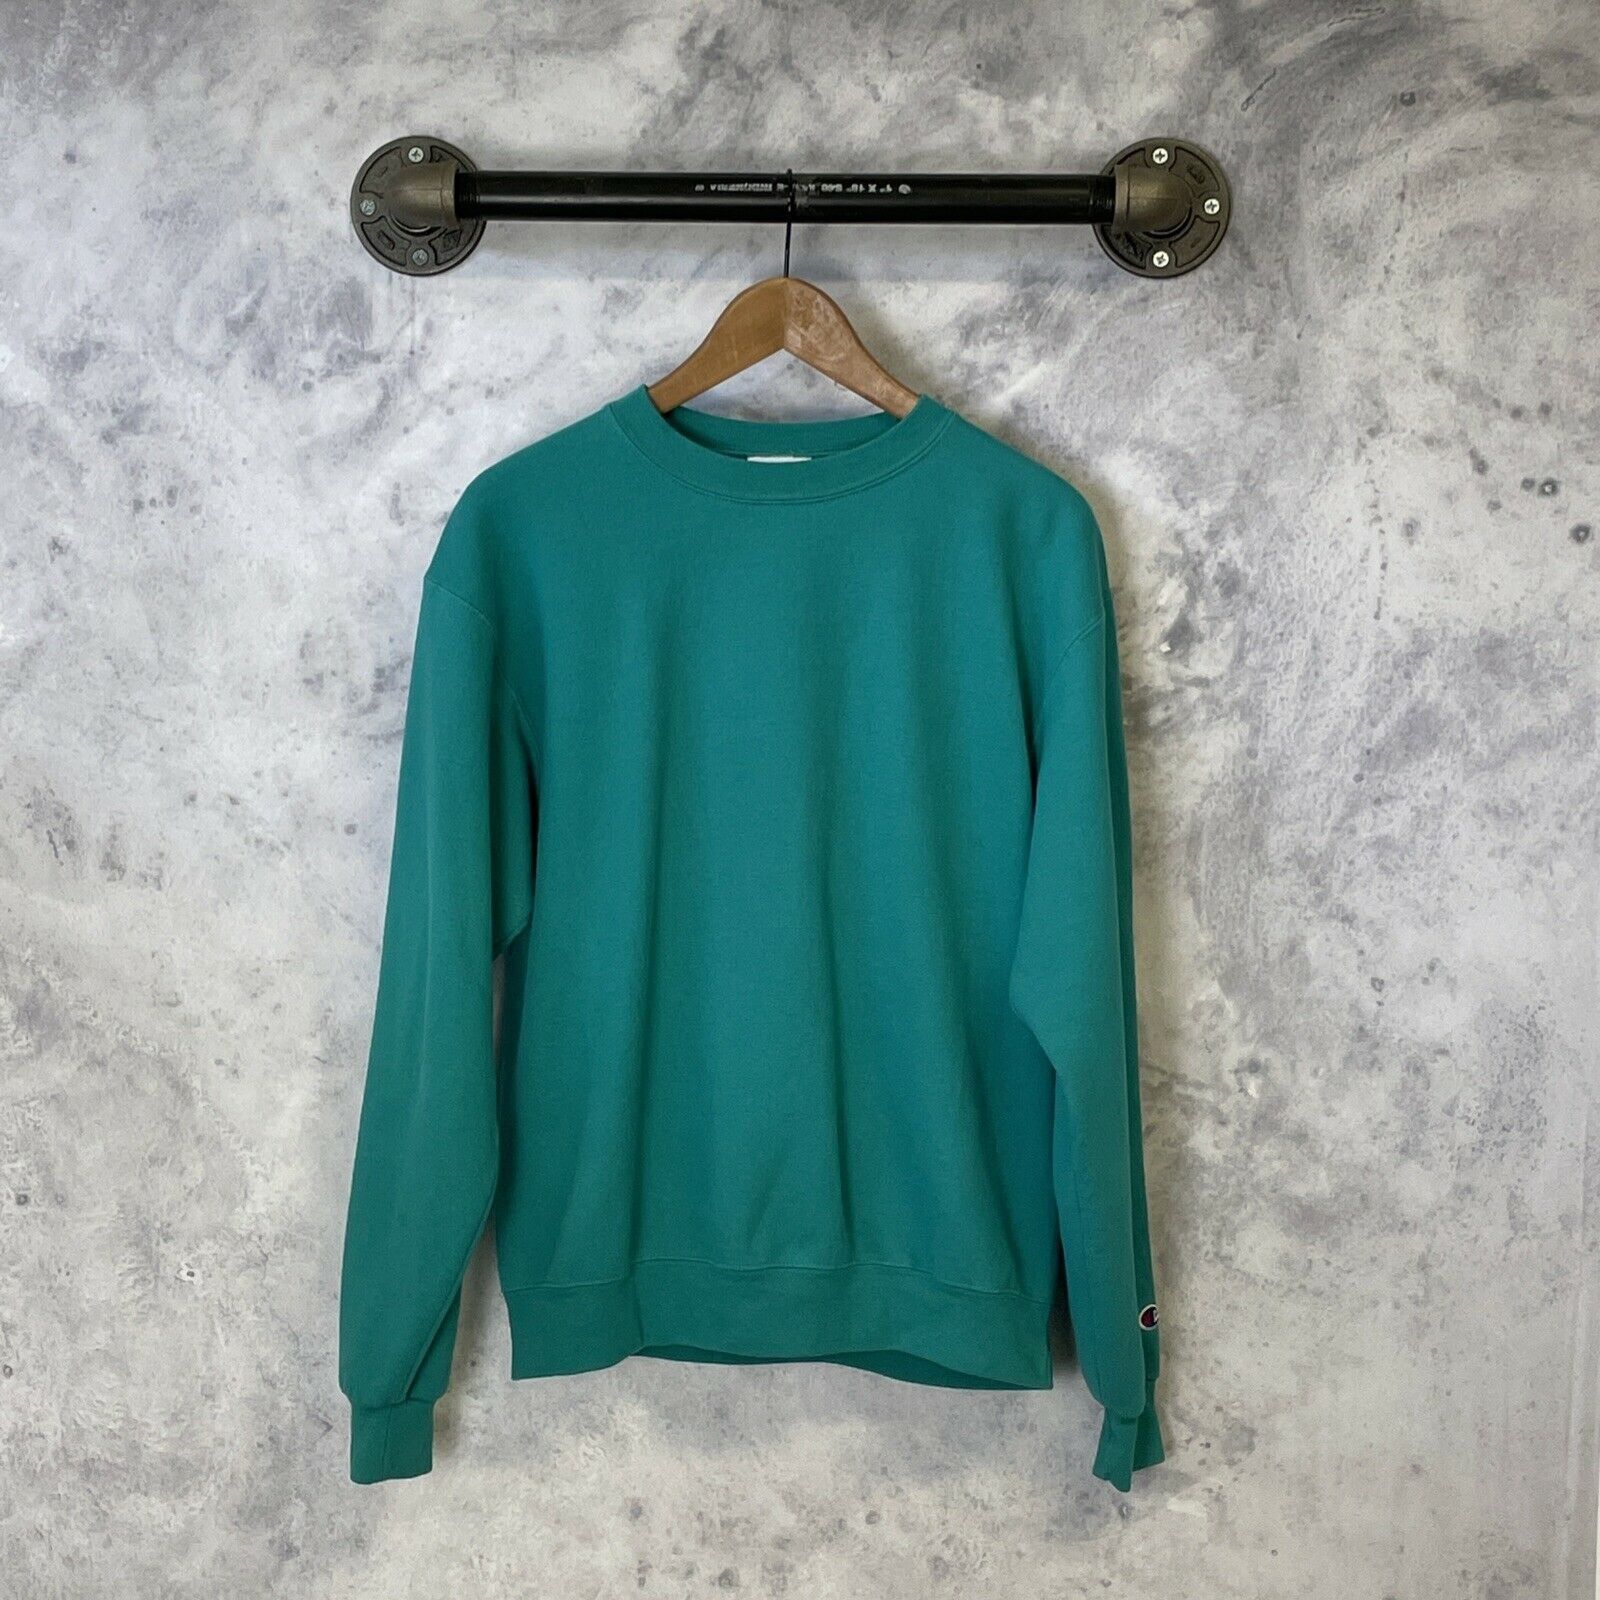 Champion Champion ECO Blank Pullover Sweatshirt Solid Teal Stained M Size US M / EU 48-50 / 2 - 1 Preview